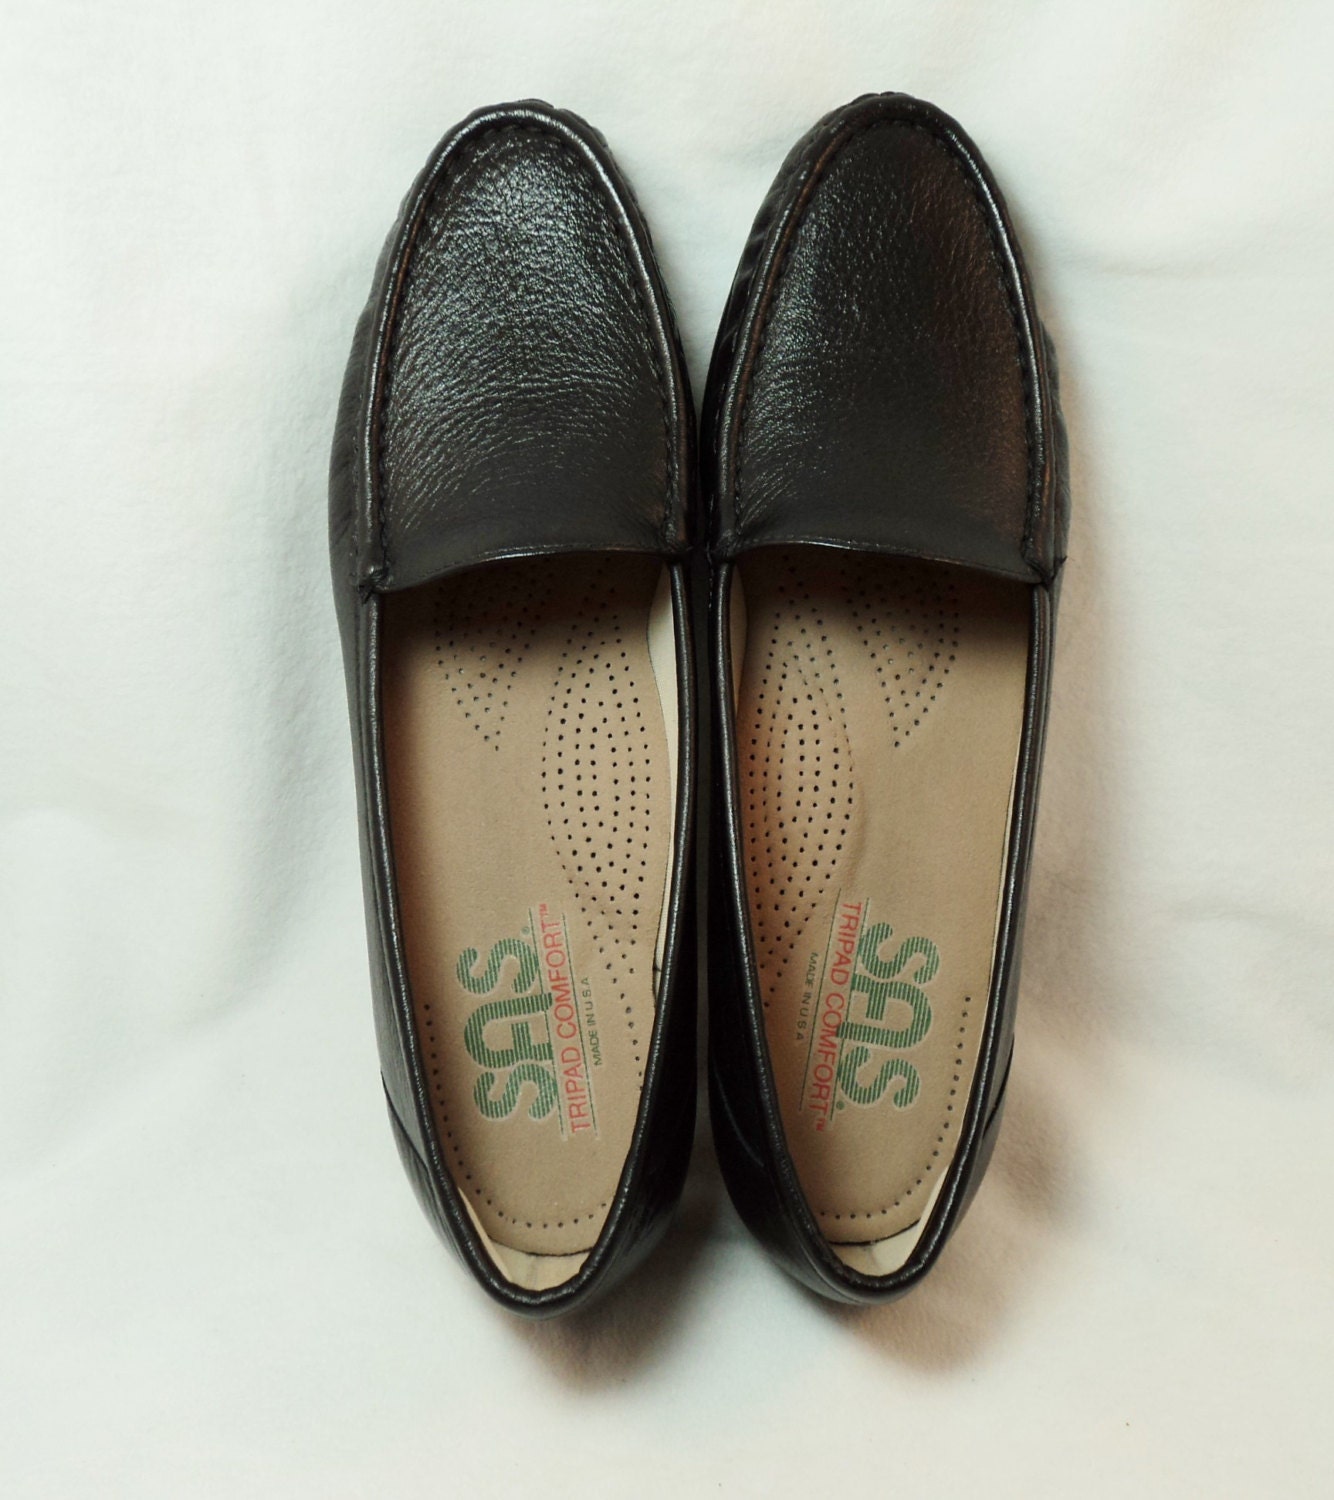 Ladies SAS Leather Shoes SIZE 9 NARROW by MontanaYogoSapphires